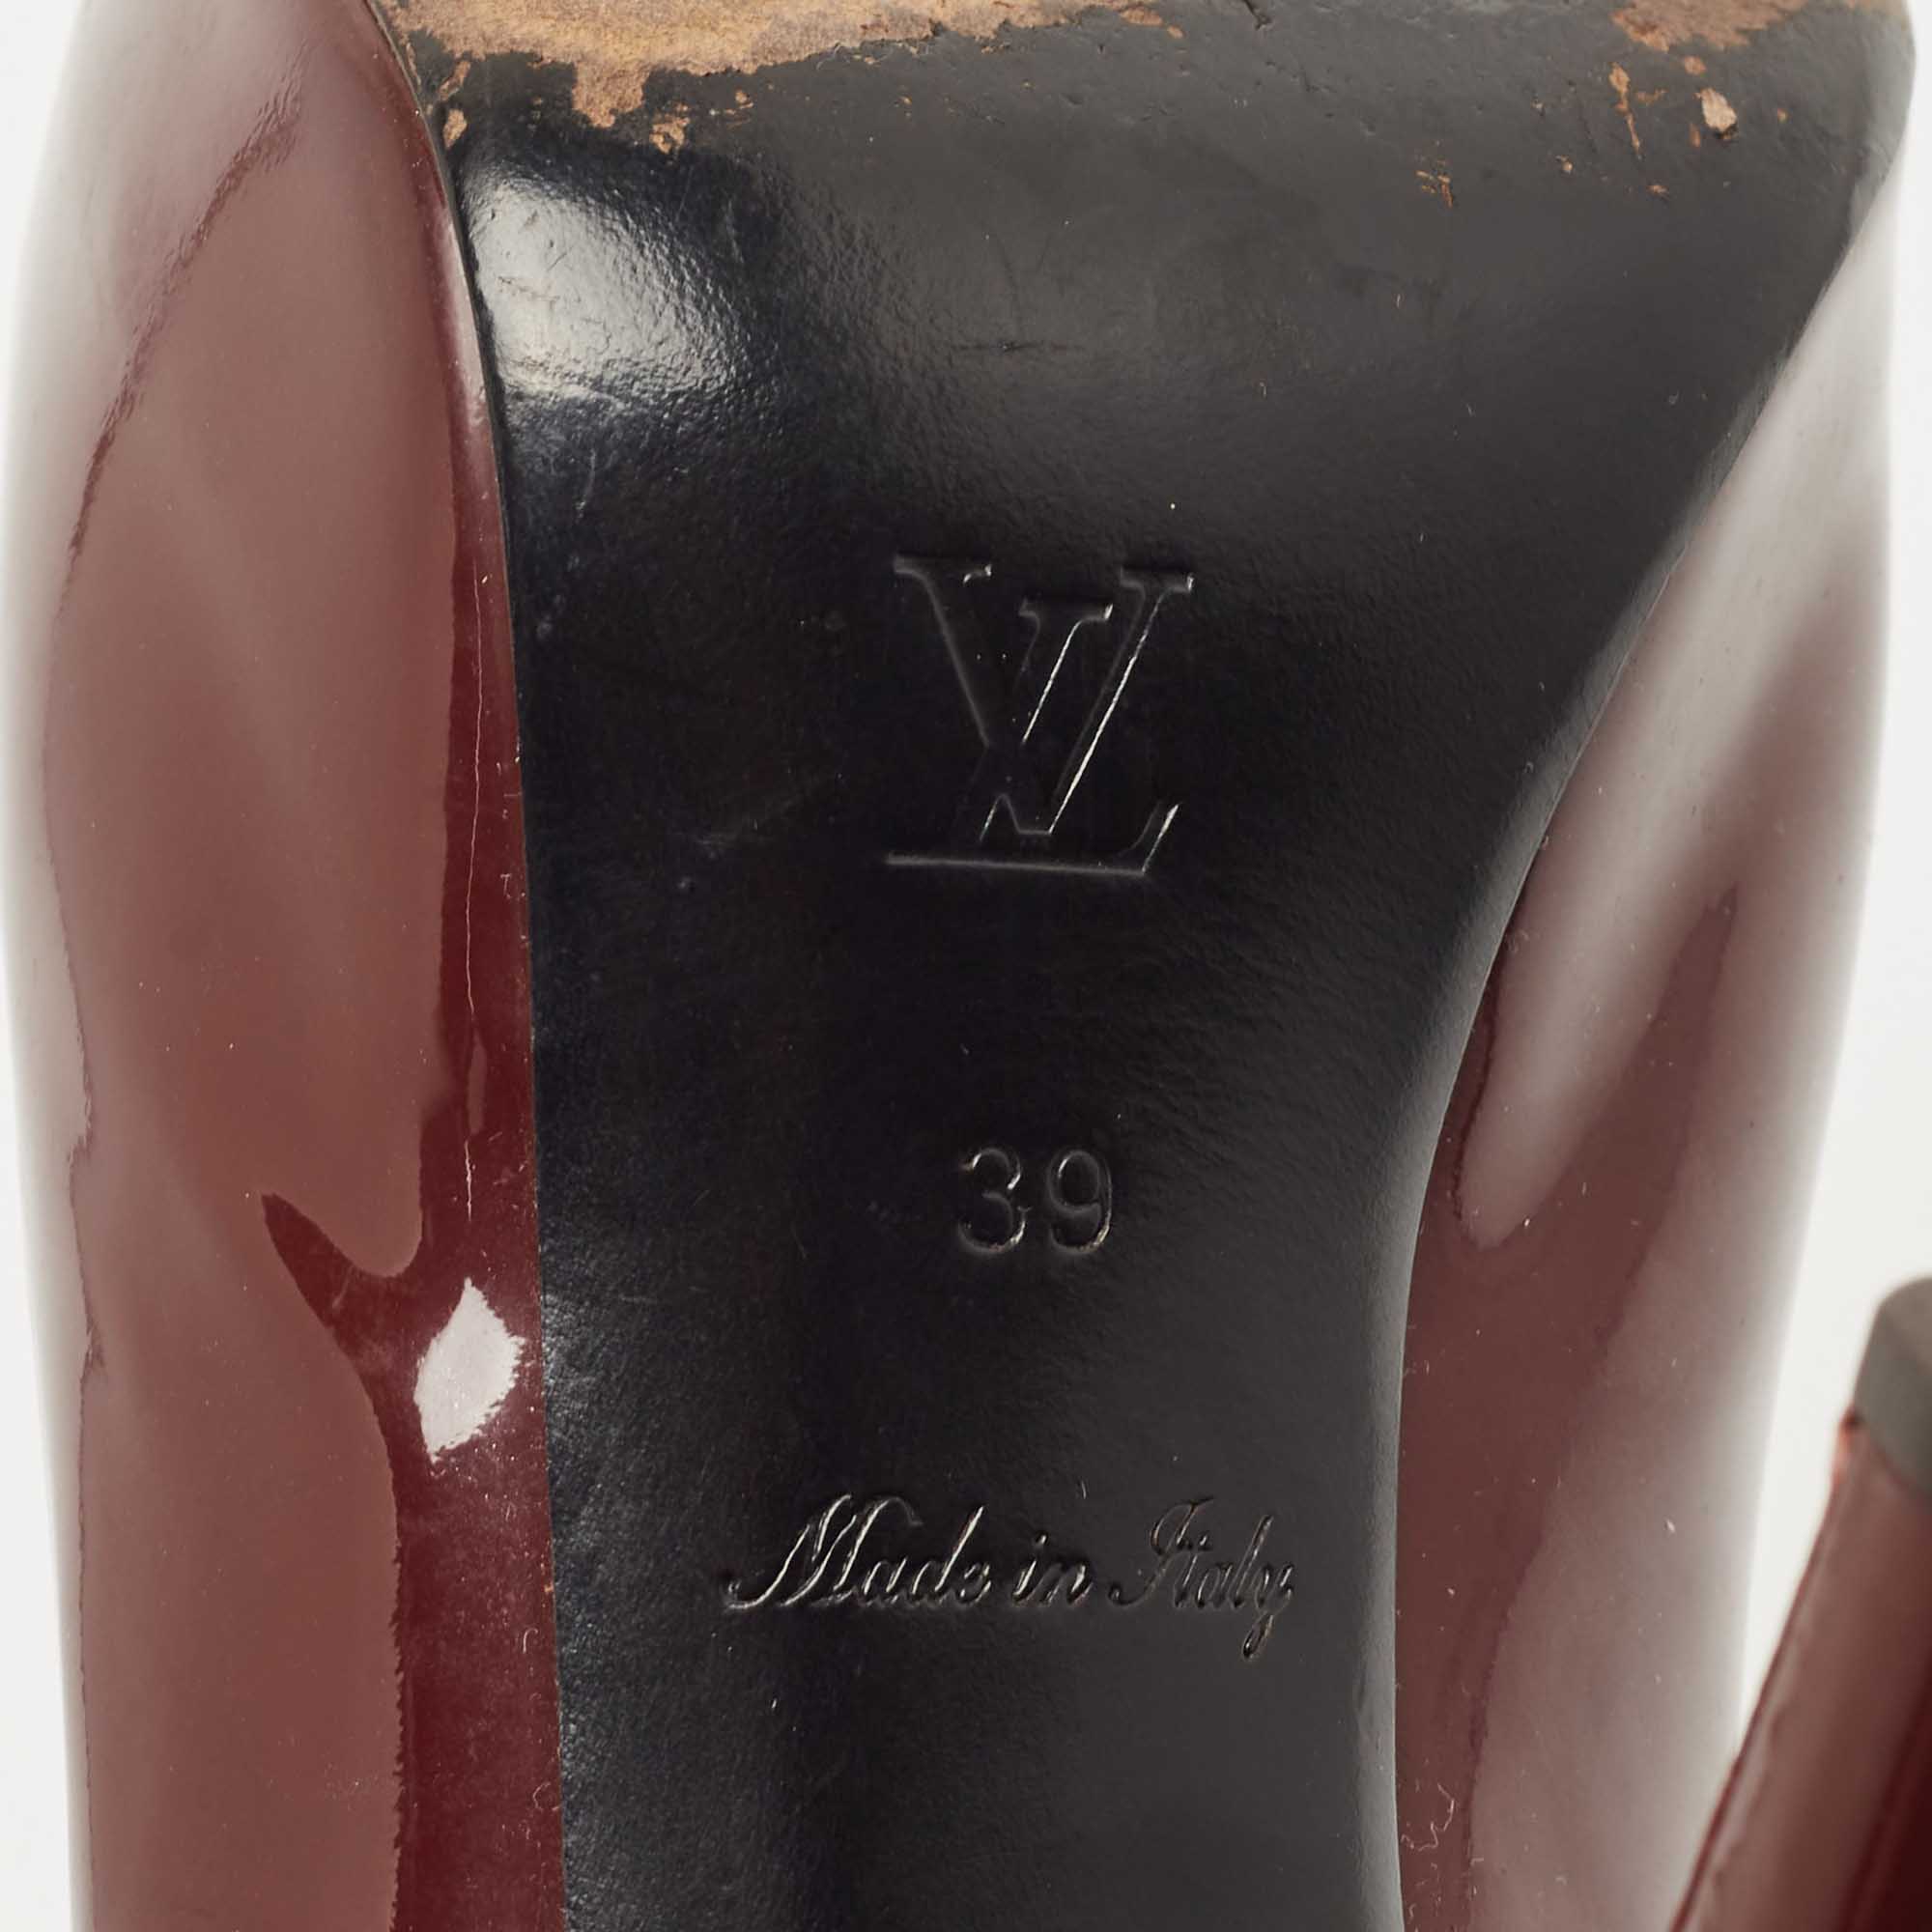 Louis Vuitton Burgundy Patent Leather Oh Really! Pumps Size 39